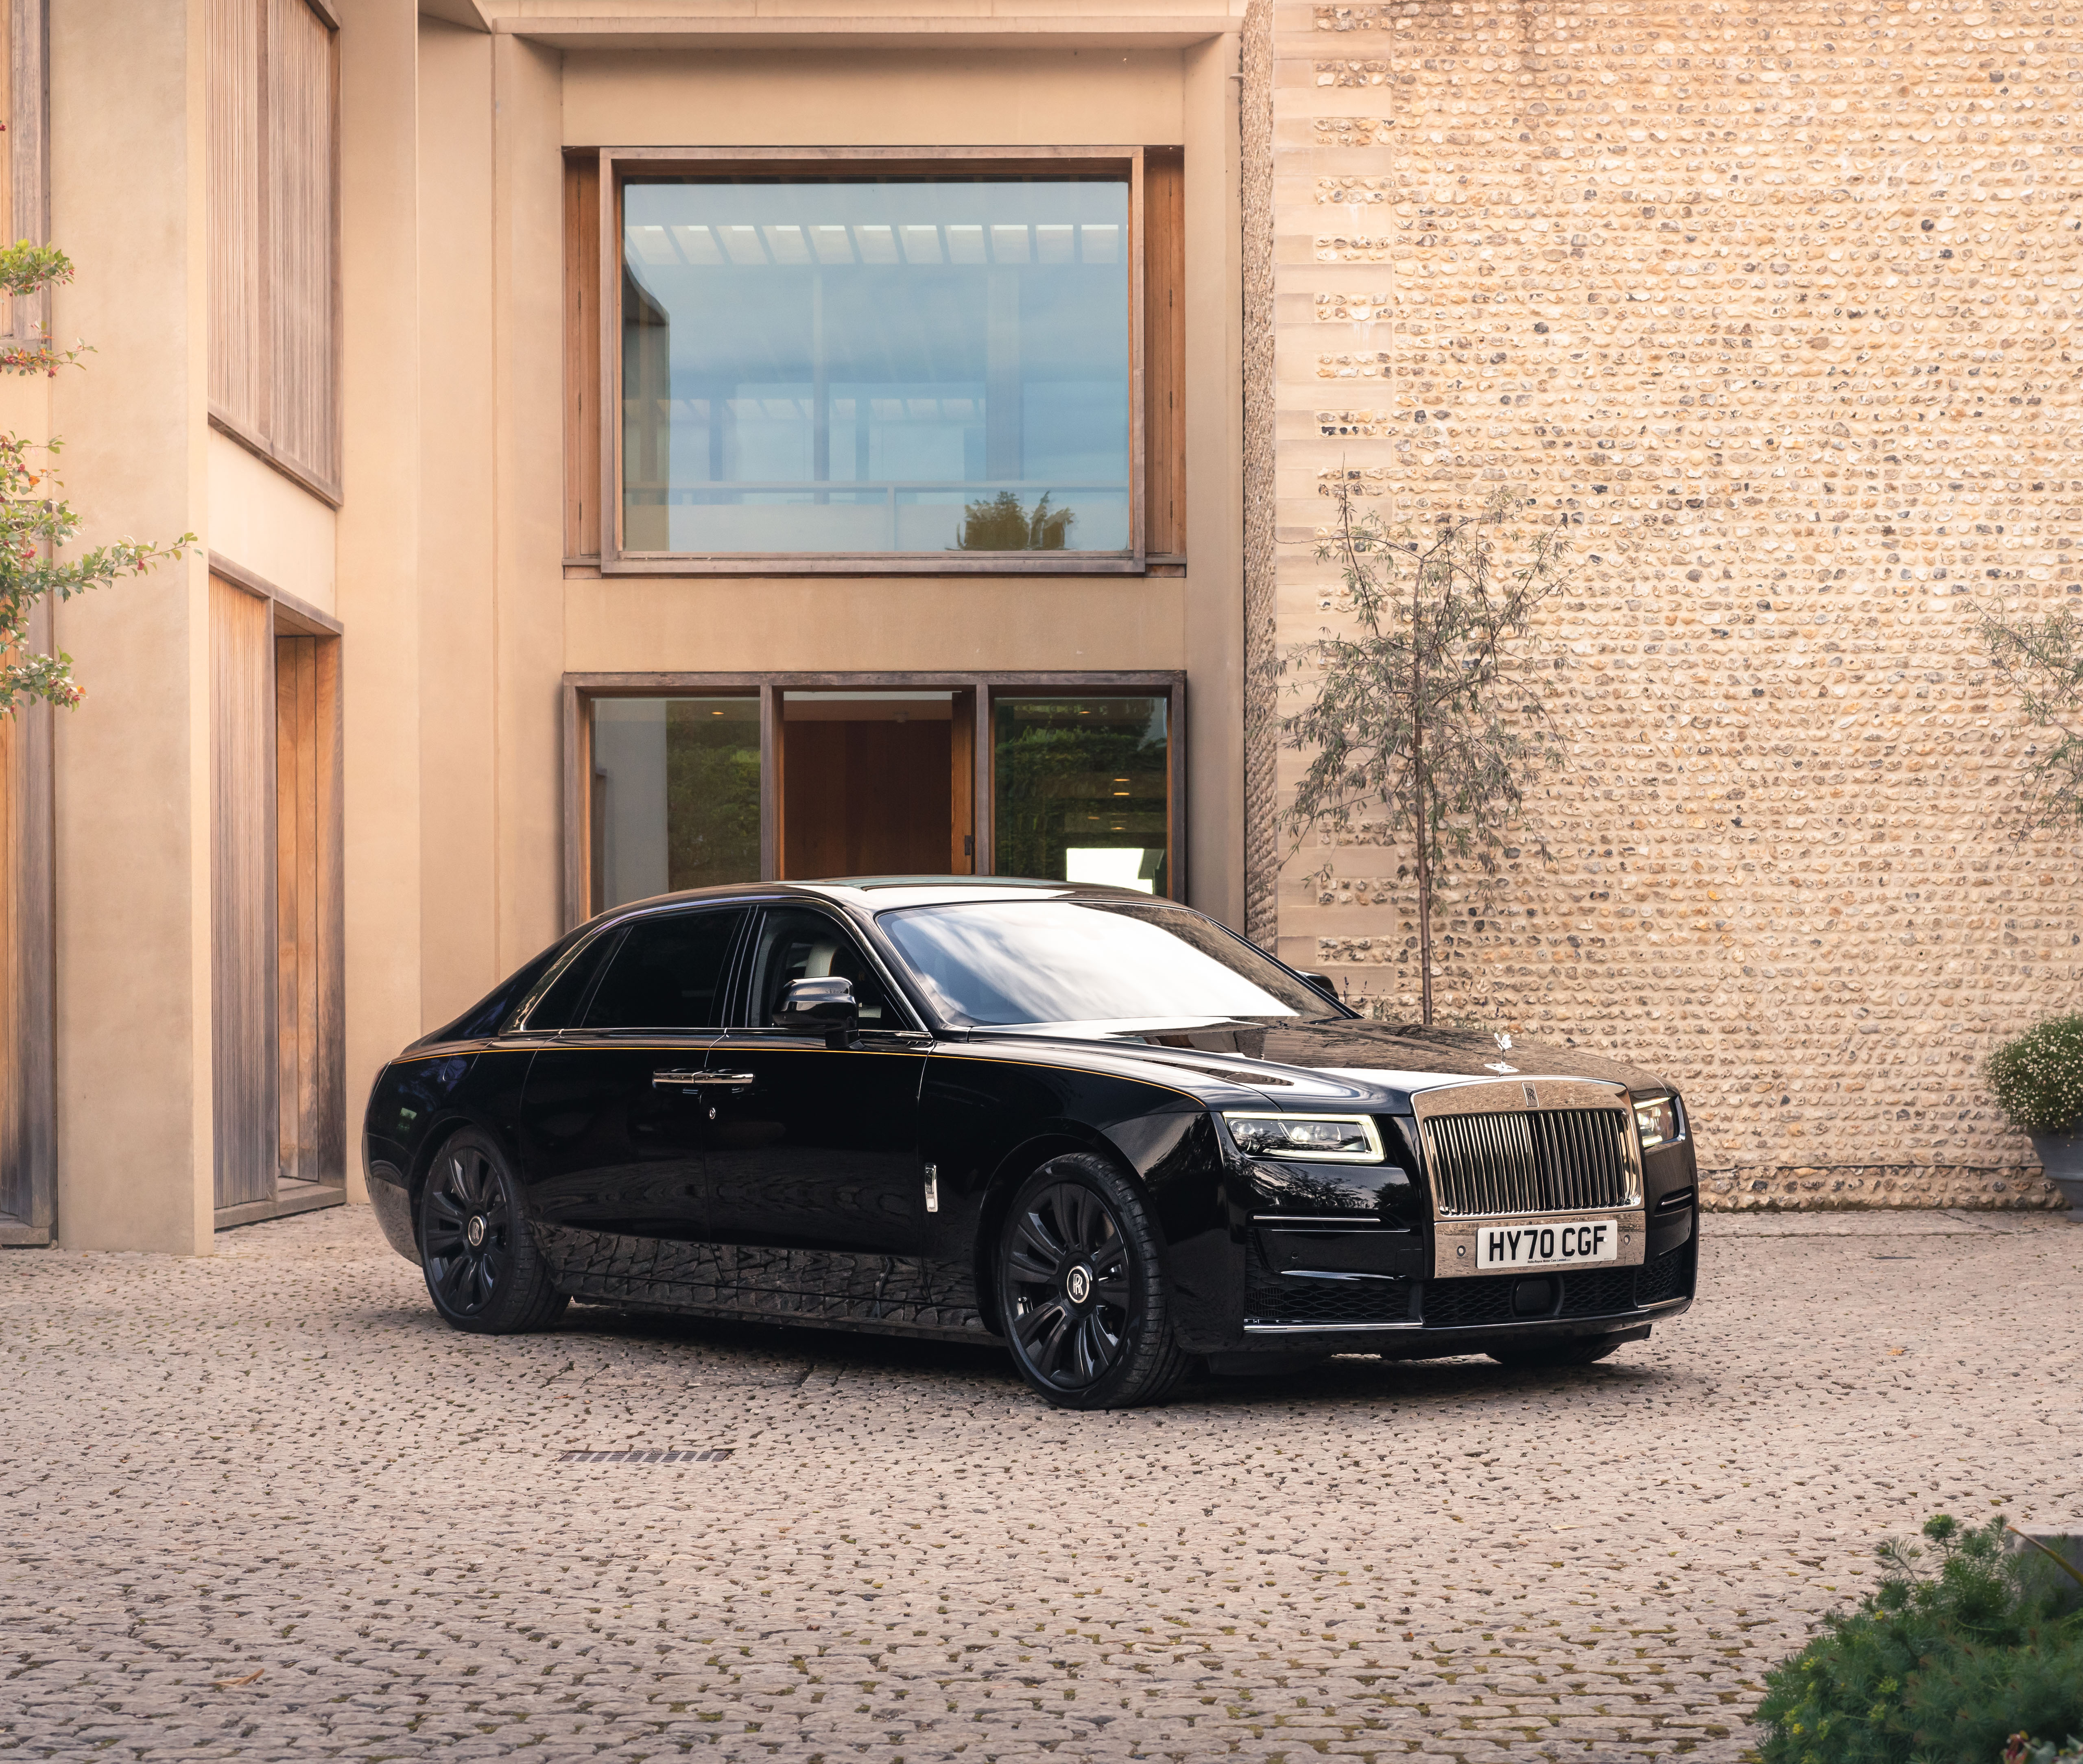 New 2021 RollsRoyce GHOST EXTENDED WHEELBASE EWB For Sale Sold  Bentley  Gold Coast Chicago Stock R819